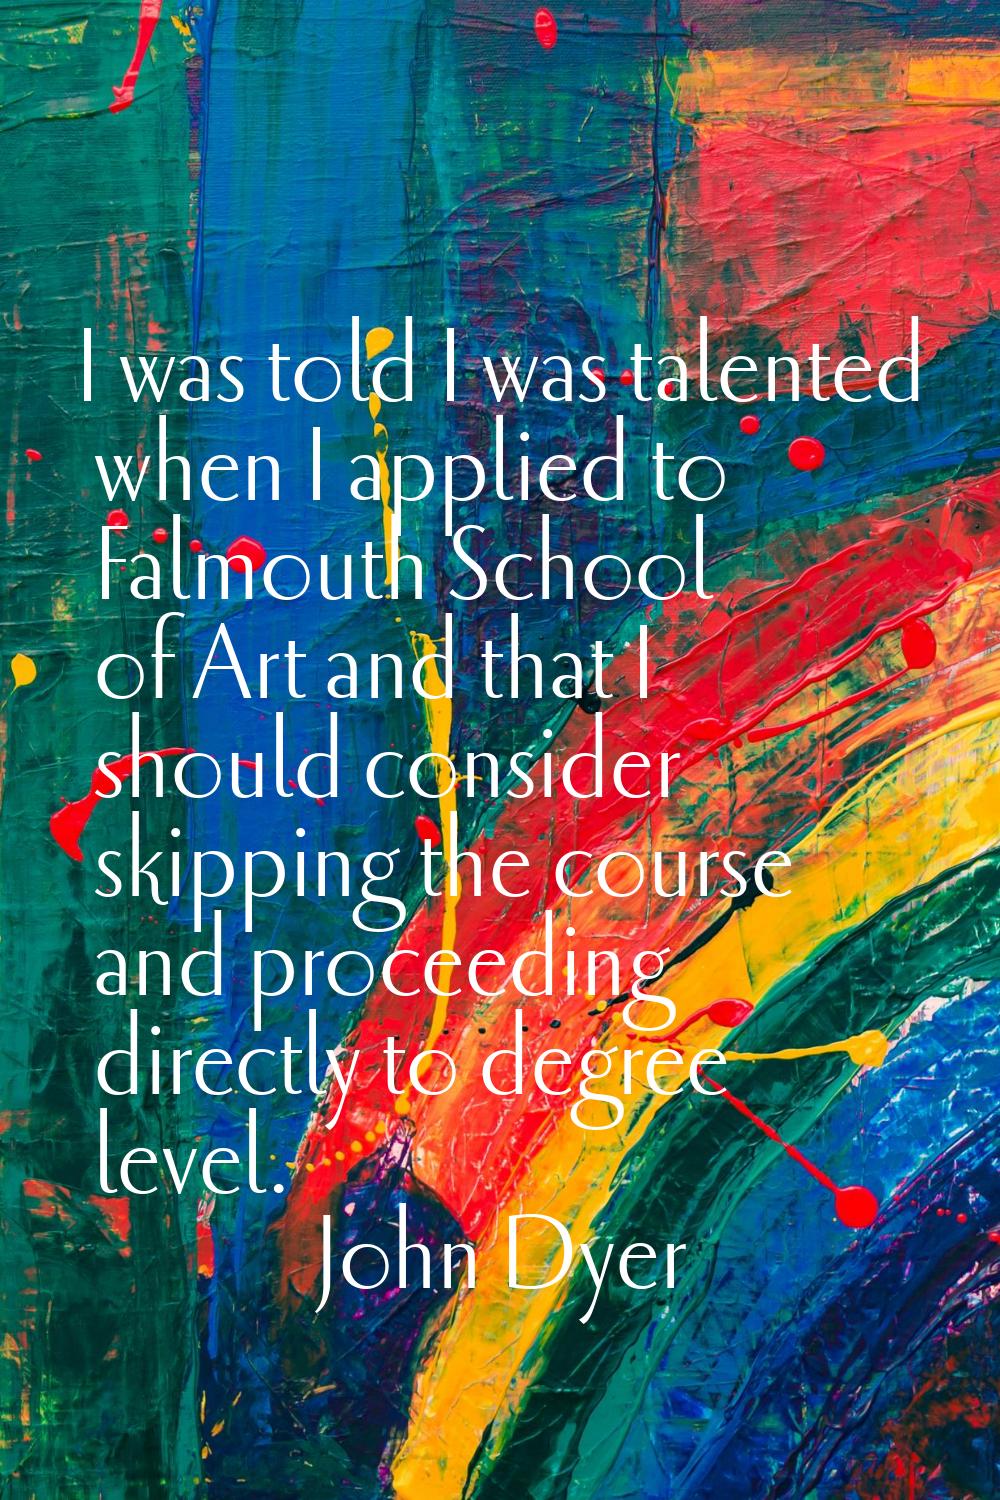 I was told I was talented when I applied to Falmouth School of Art and that I should consider skipp